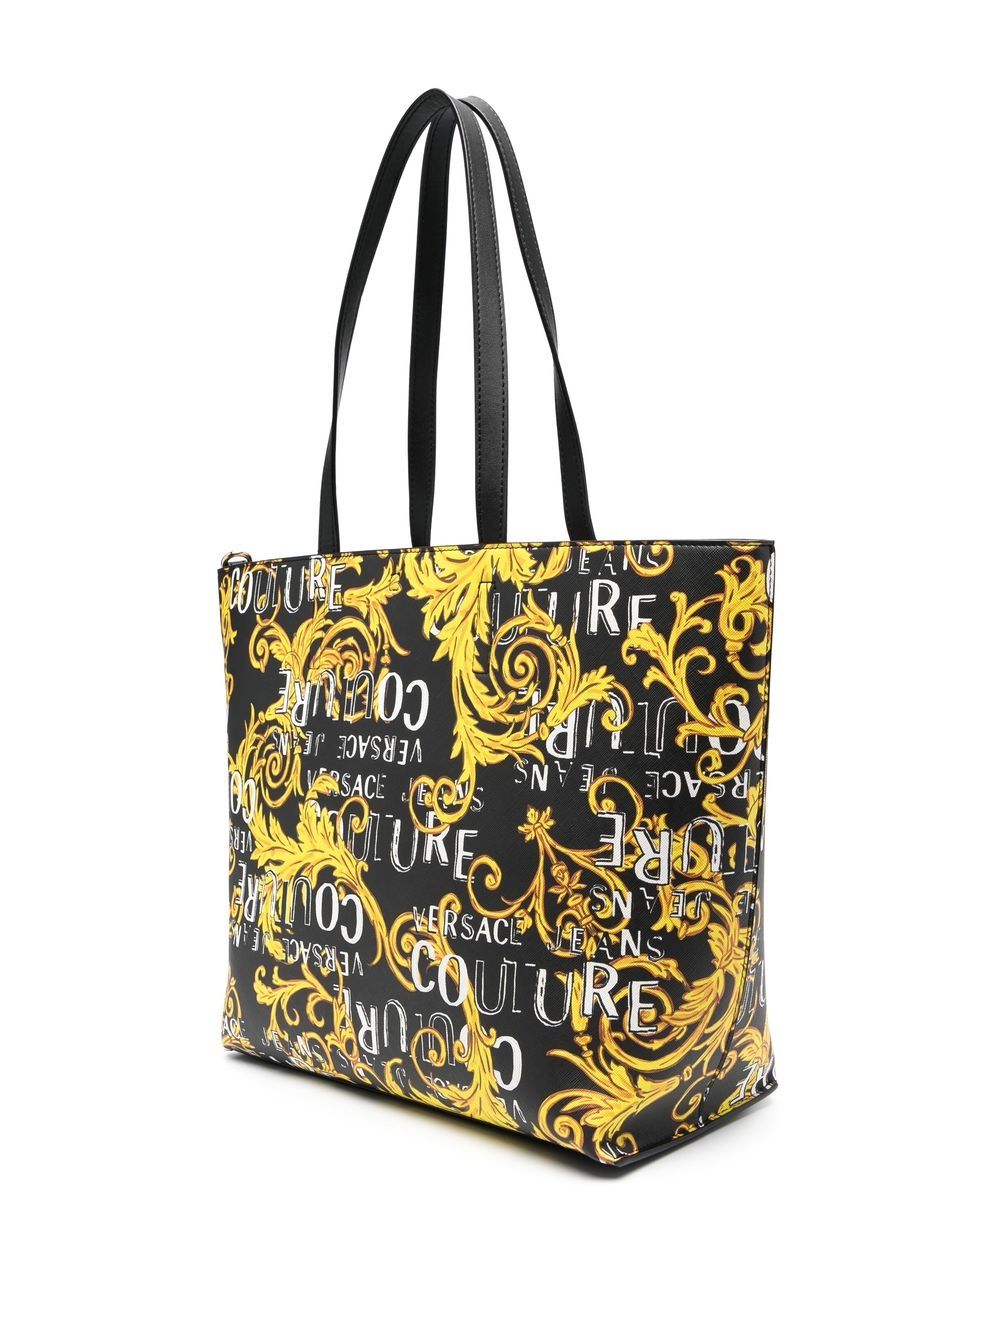 Versace Jeans Couture faux-leather Tote Bag - Farfetch